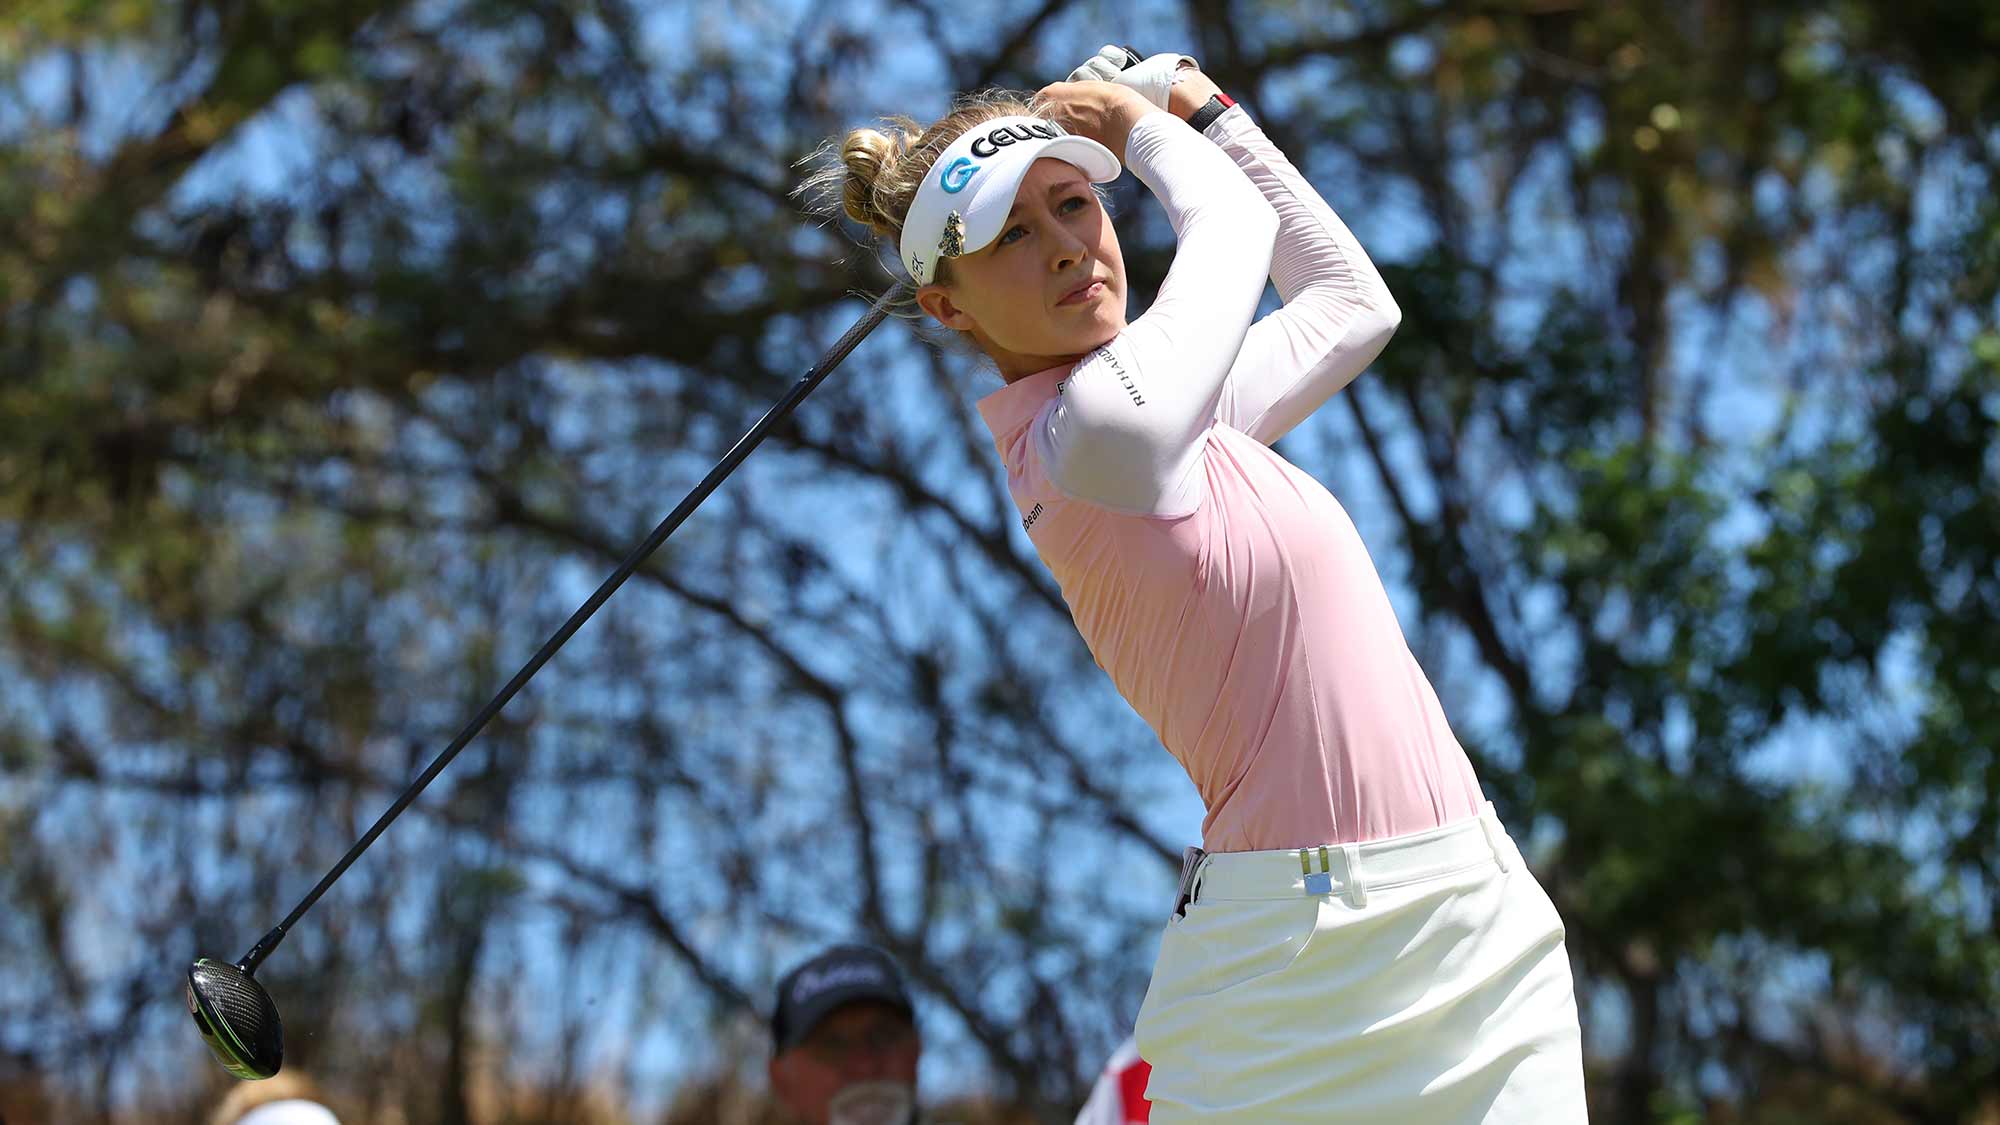 Nelly Korda watches her drive on the fifth hole during the third round of the LOTTE Championship on April 20, 2019 in Kapolei, Hawaii